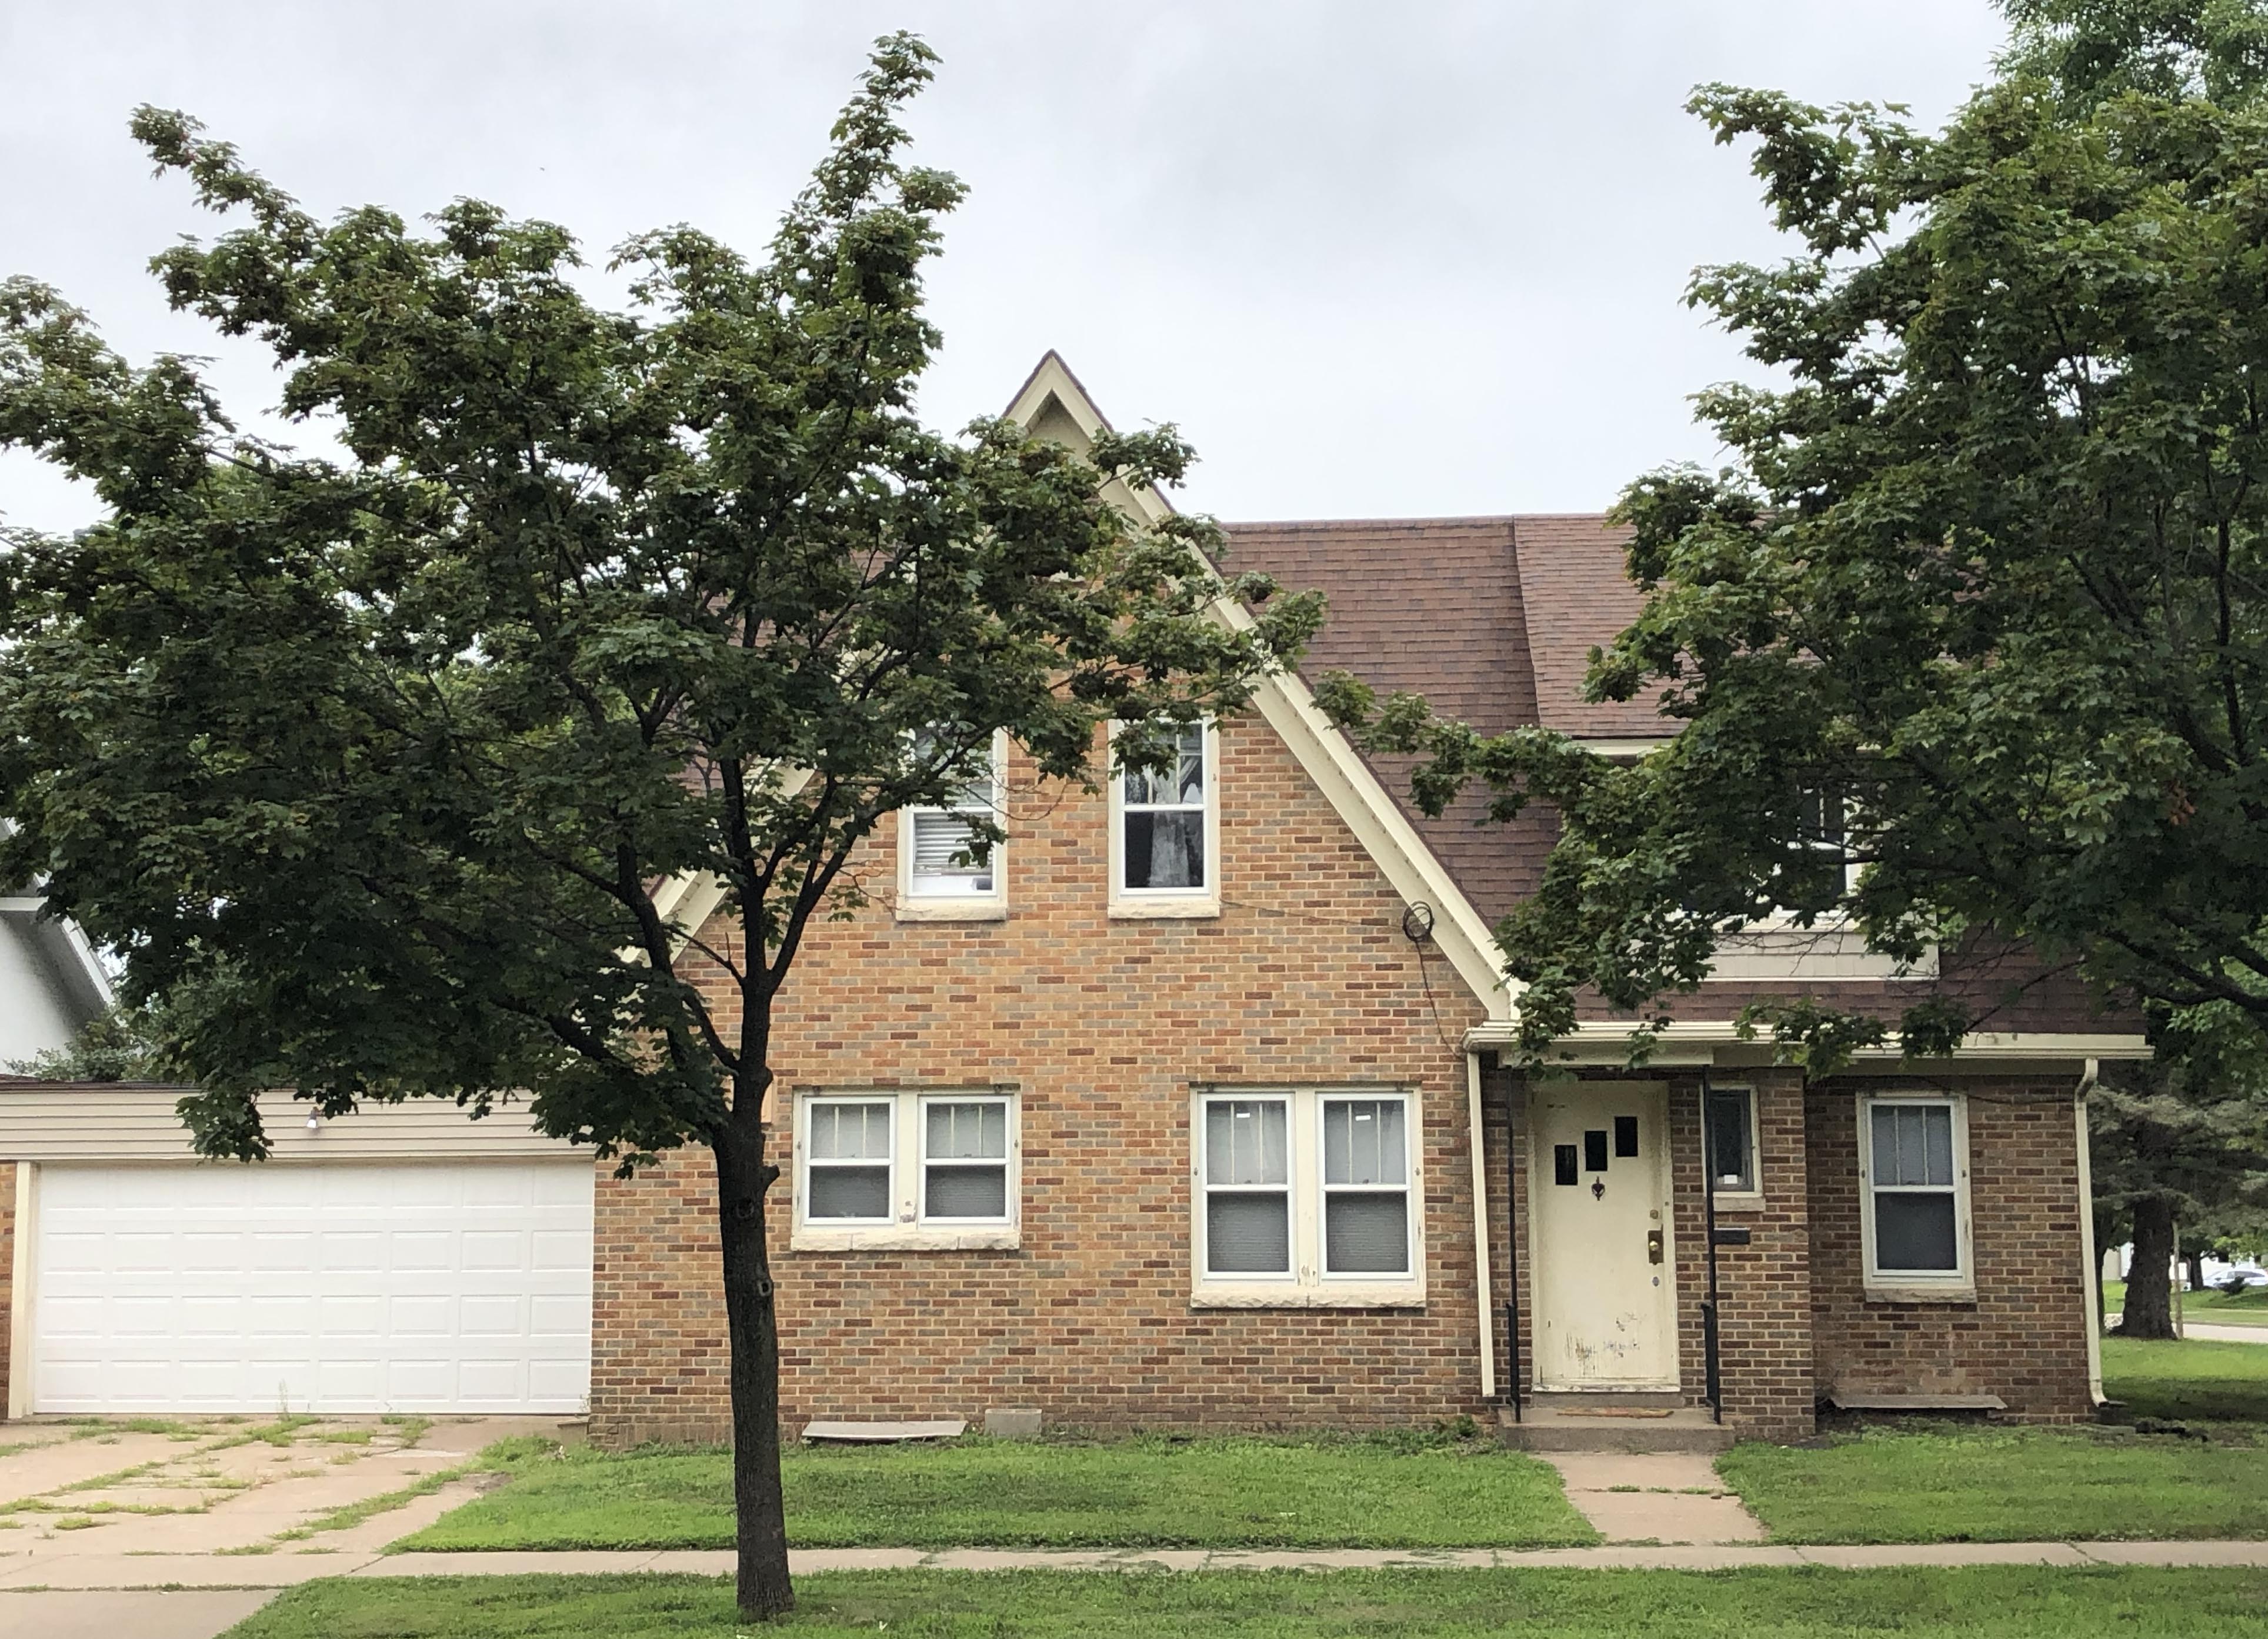 418 5th Ave, Eau Claire, Wisconsin 54703, 3 Bedrooms Bedrooms, ,1 BathroomBathrooms,Multi-Family,Sublease,418 5th Ave,1062